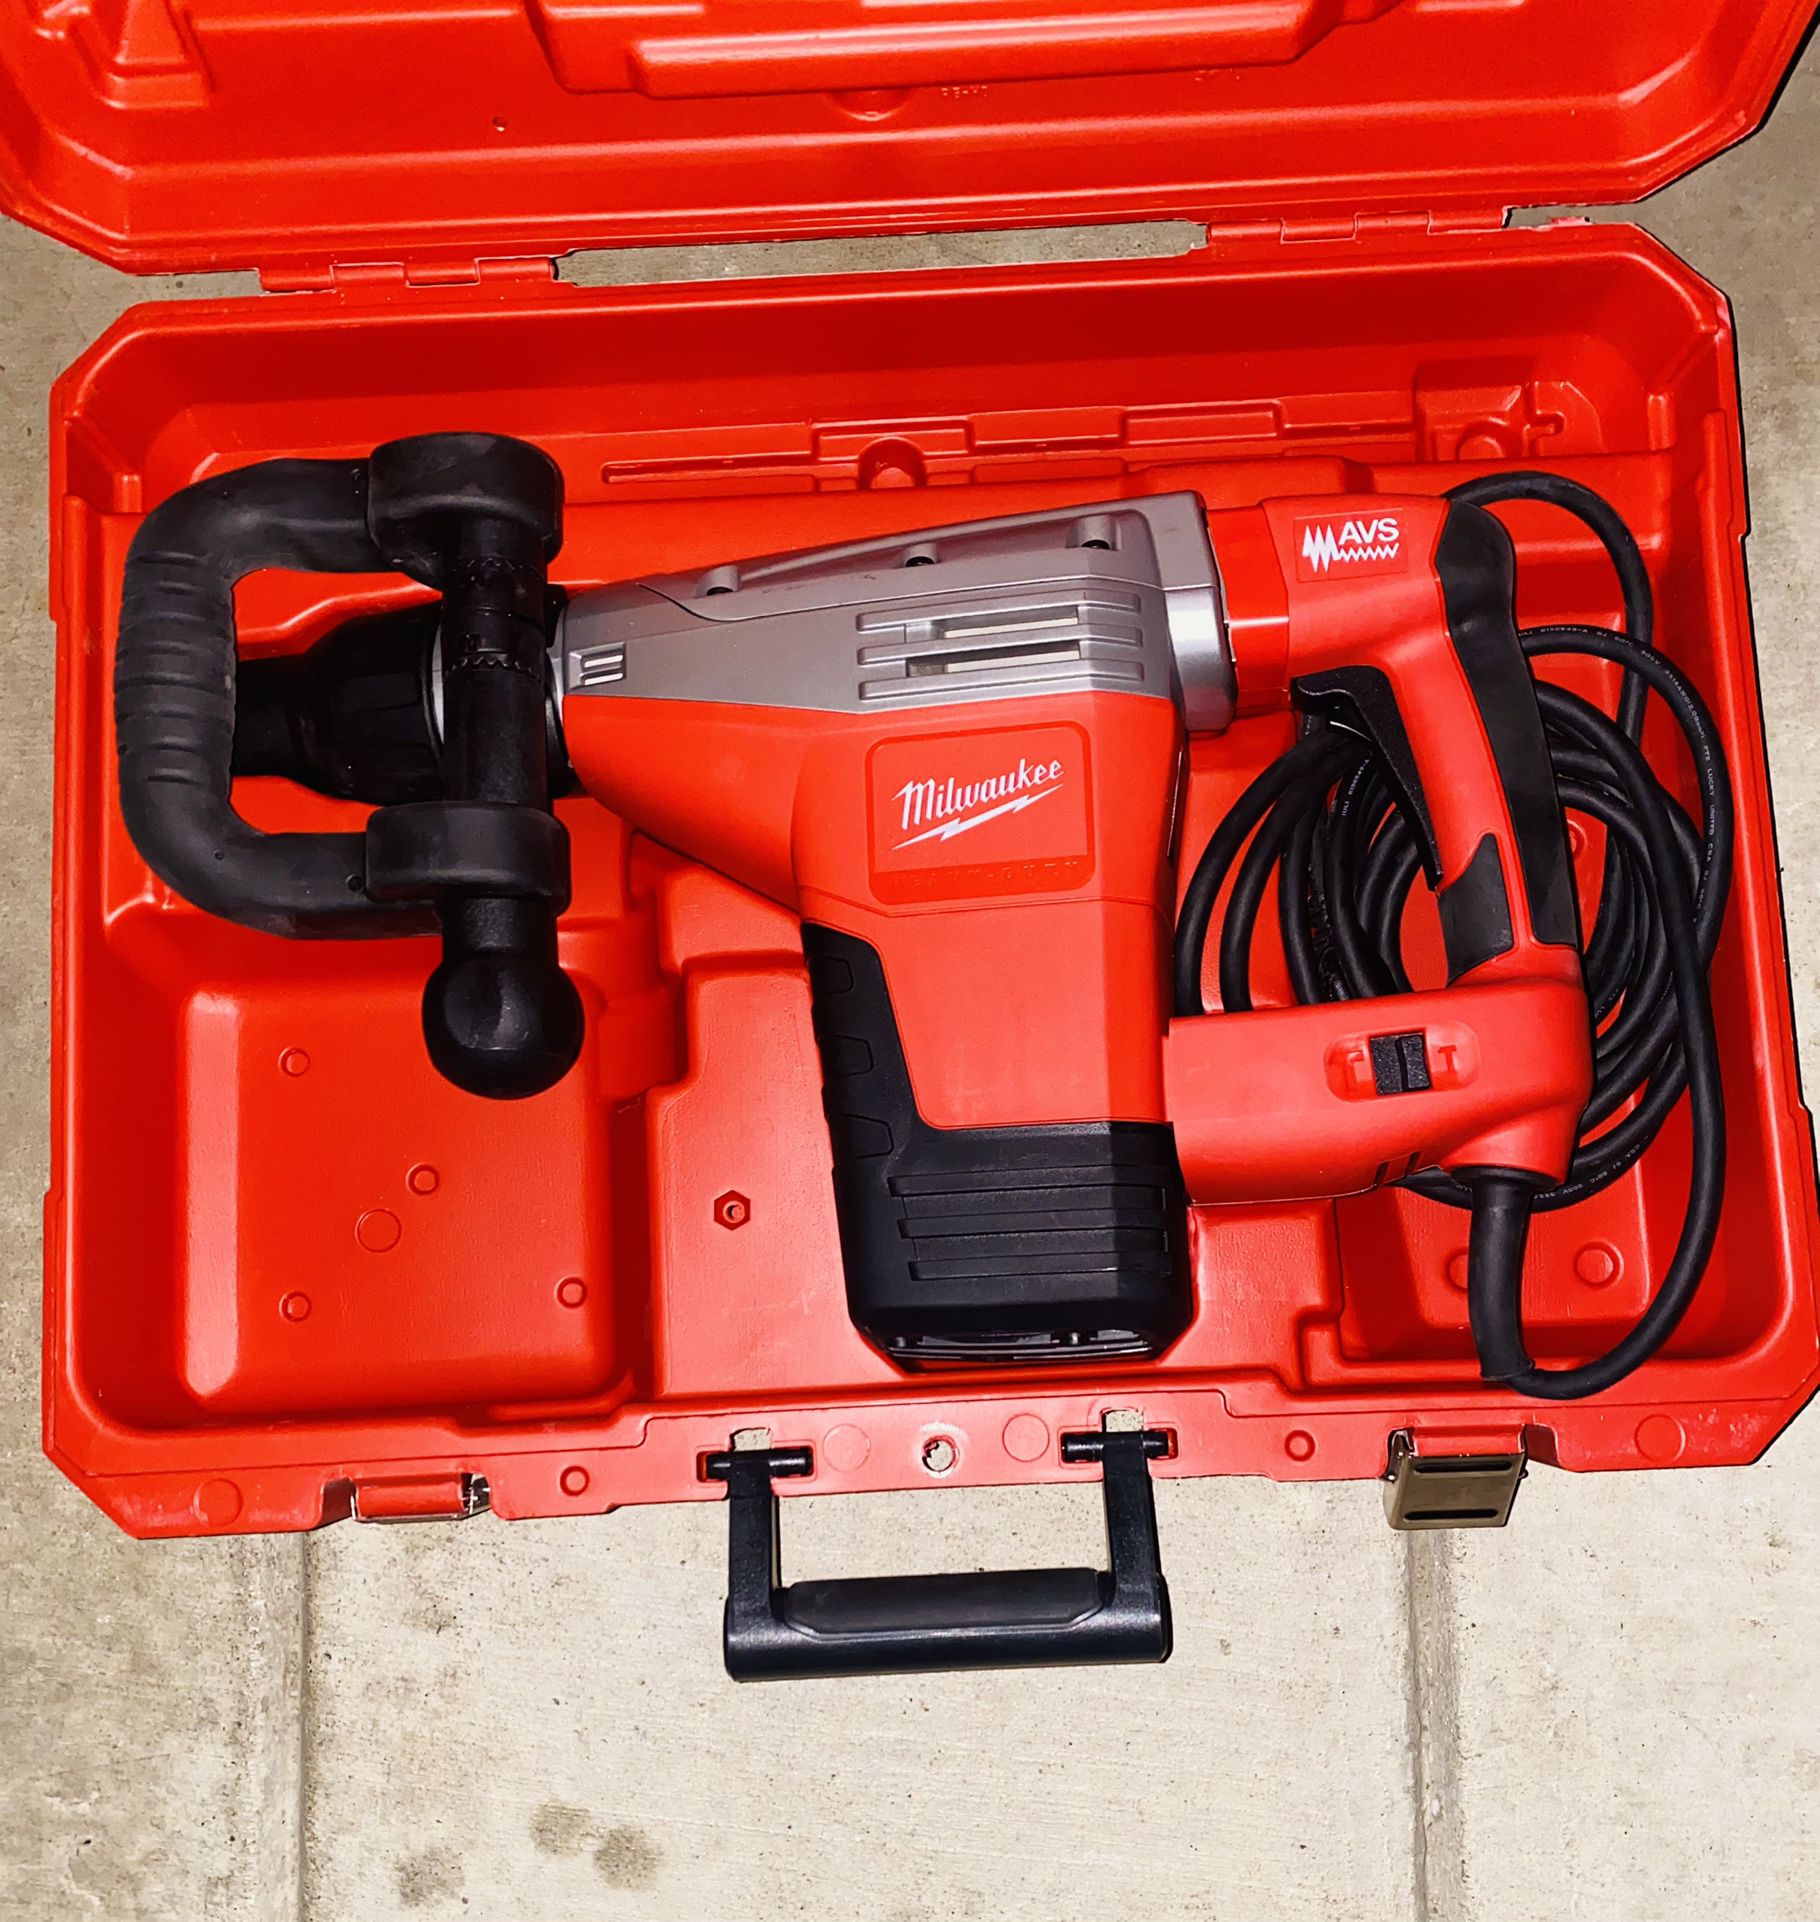 Milwaukee 5446-21 120V 14LB Corded SDS Max Demolition Hammer Heavy Duty for  Sale in Riverbank, CA OfferUp